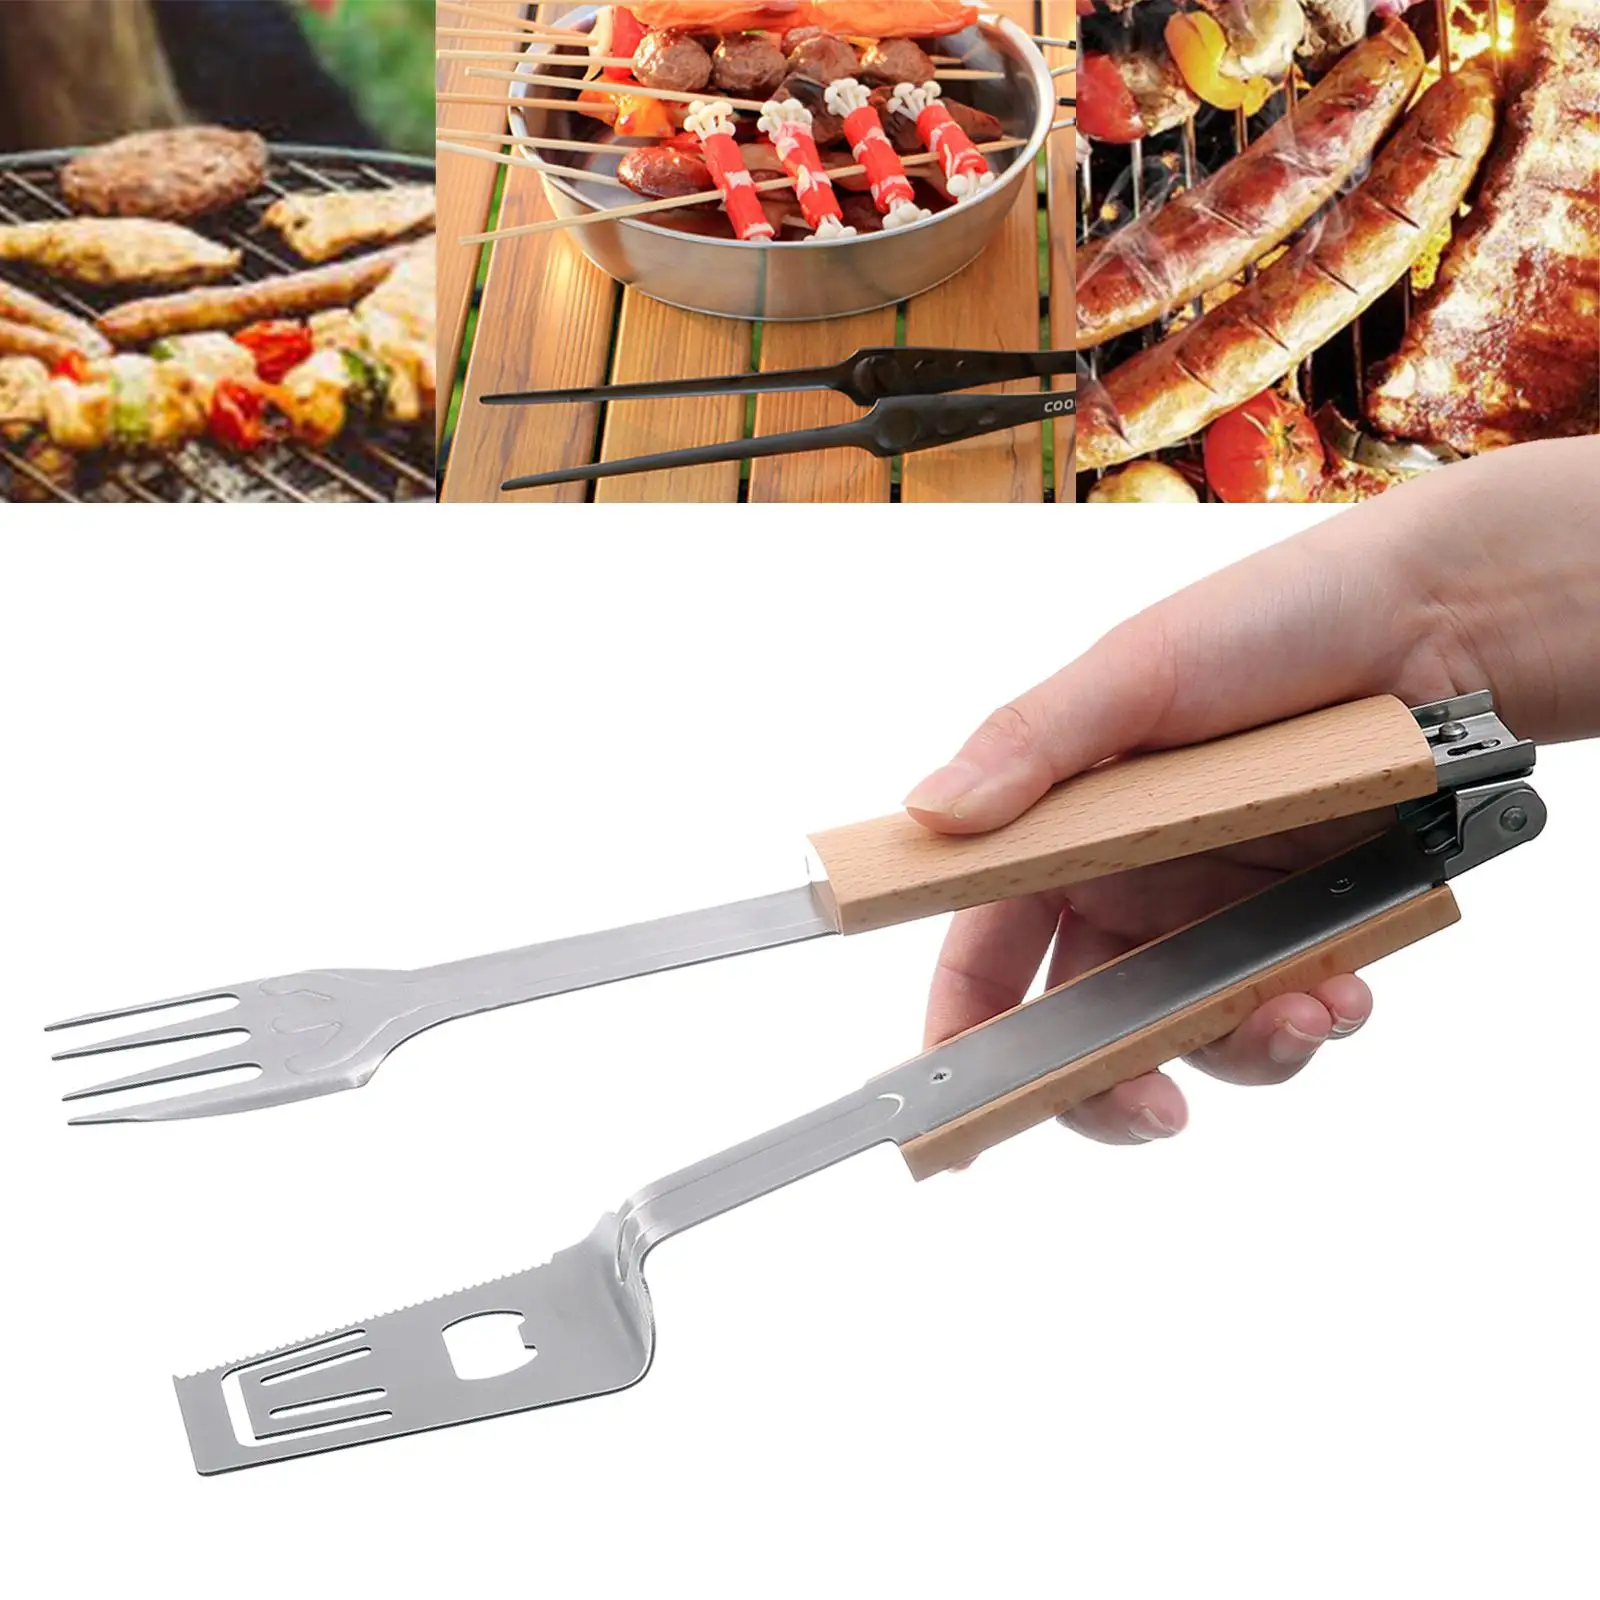 Kitchen Tongs Catering Tools Cooking Long Picnic Stainless Steel Grill Tongs